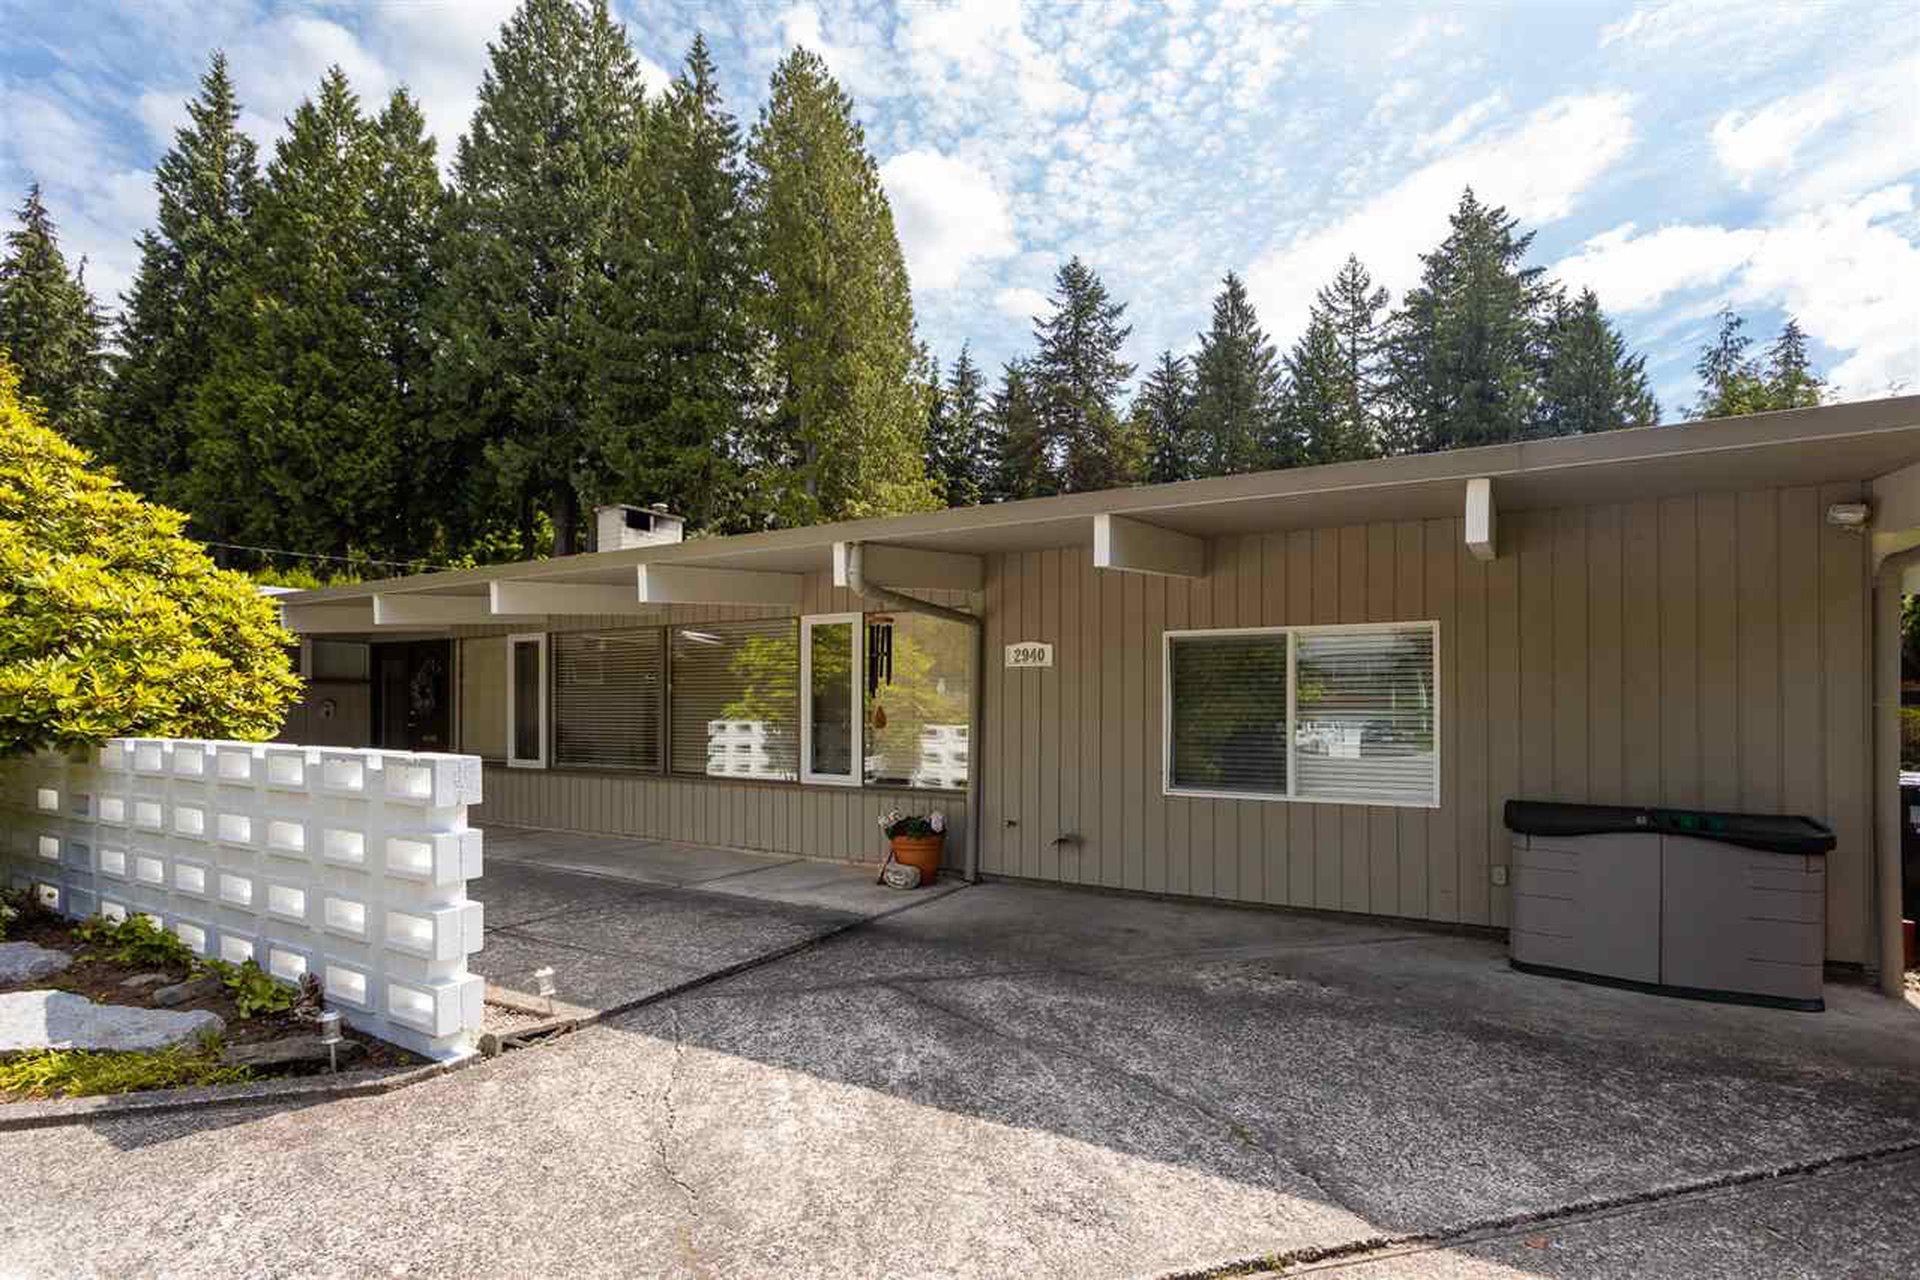 north vancouver rancher listings and sale prices